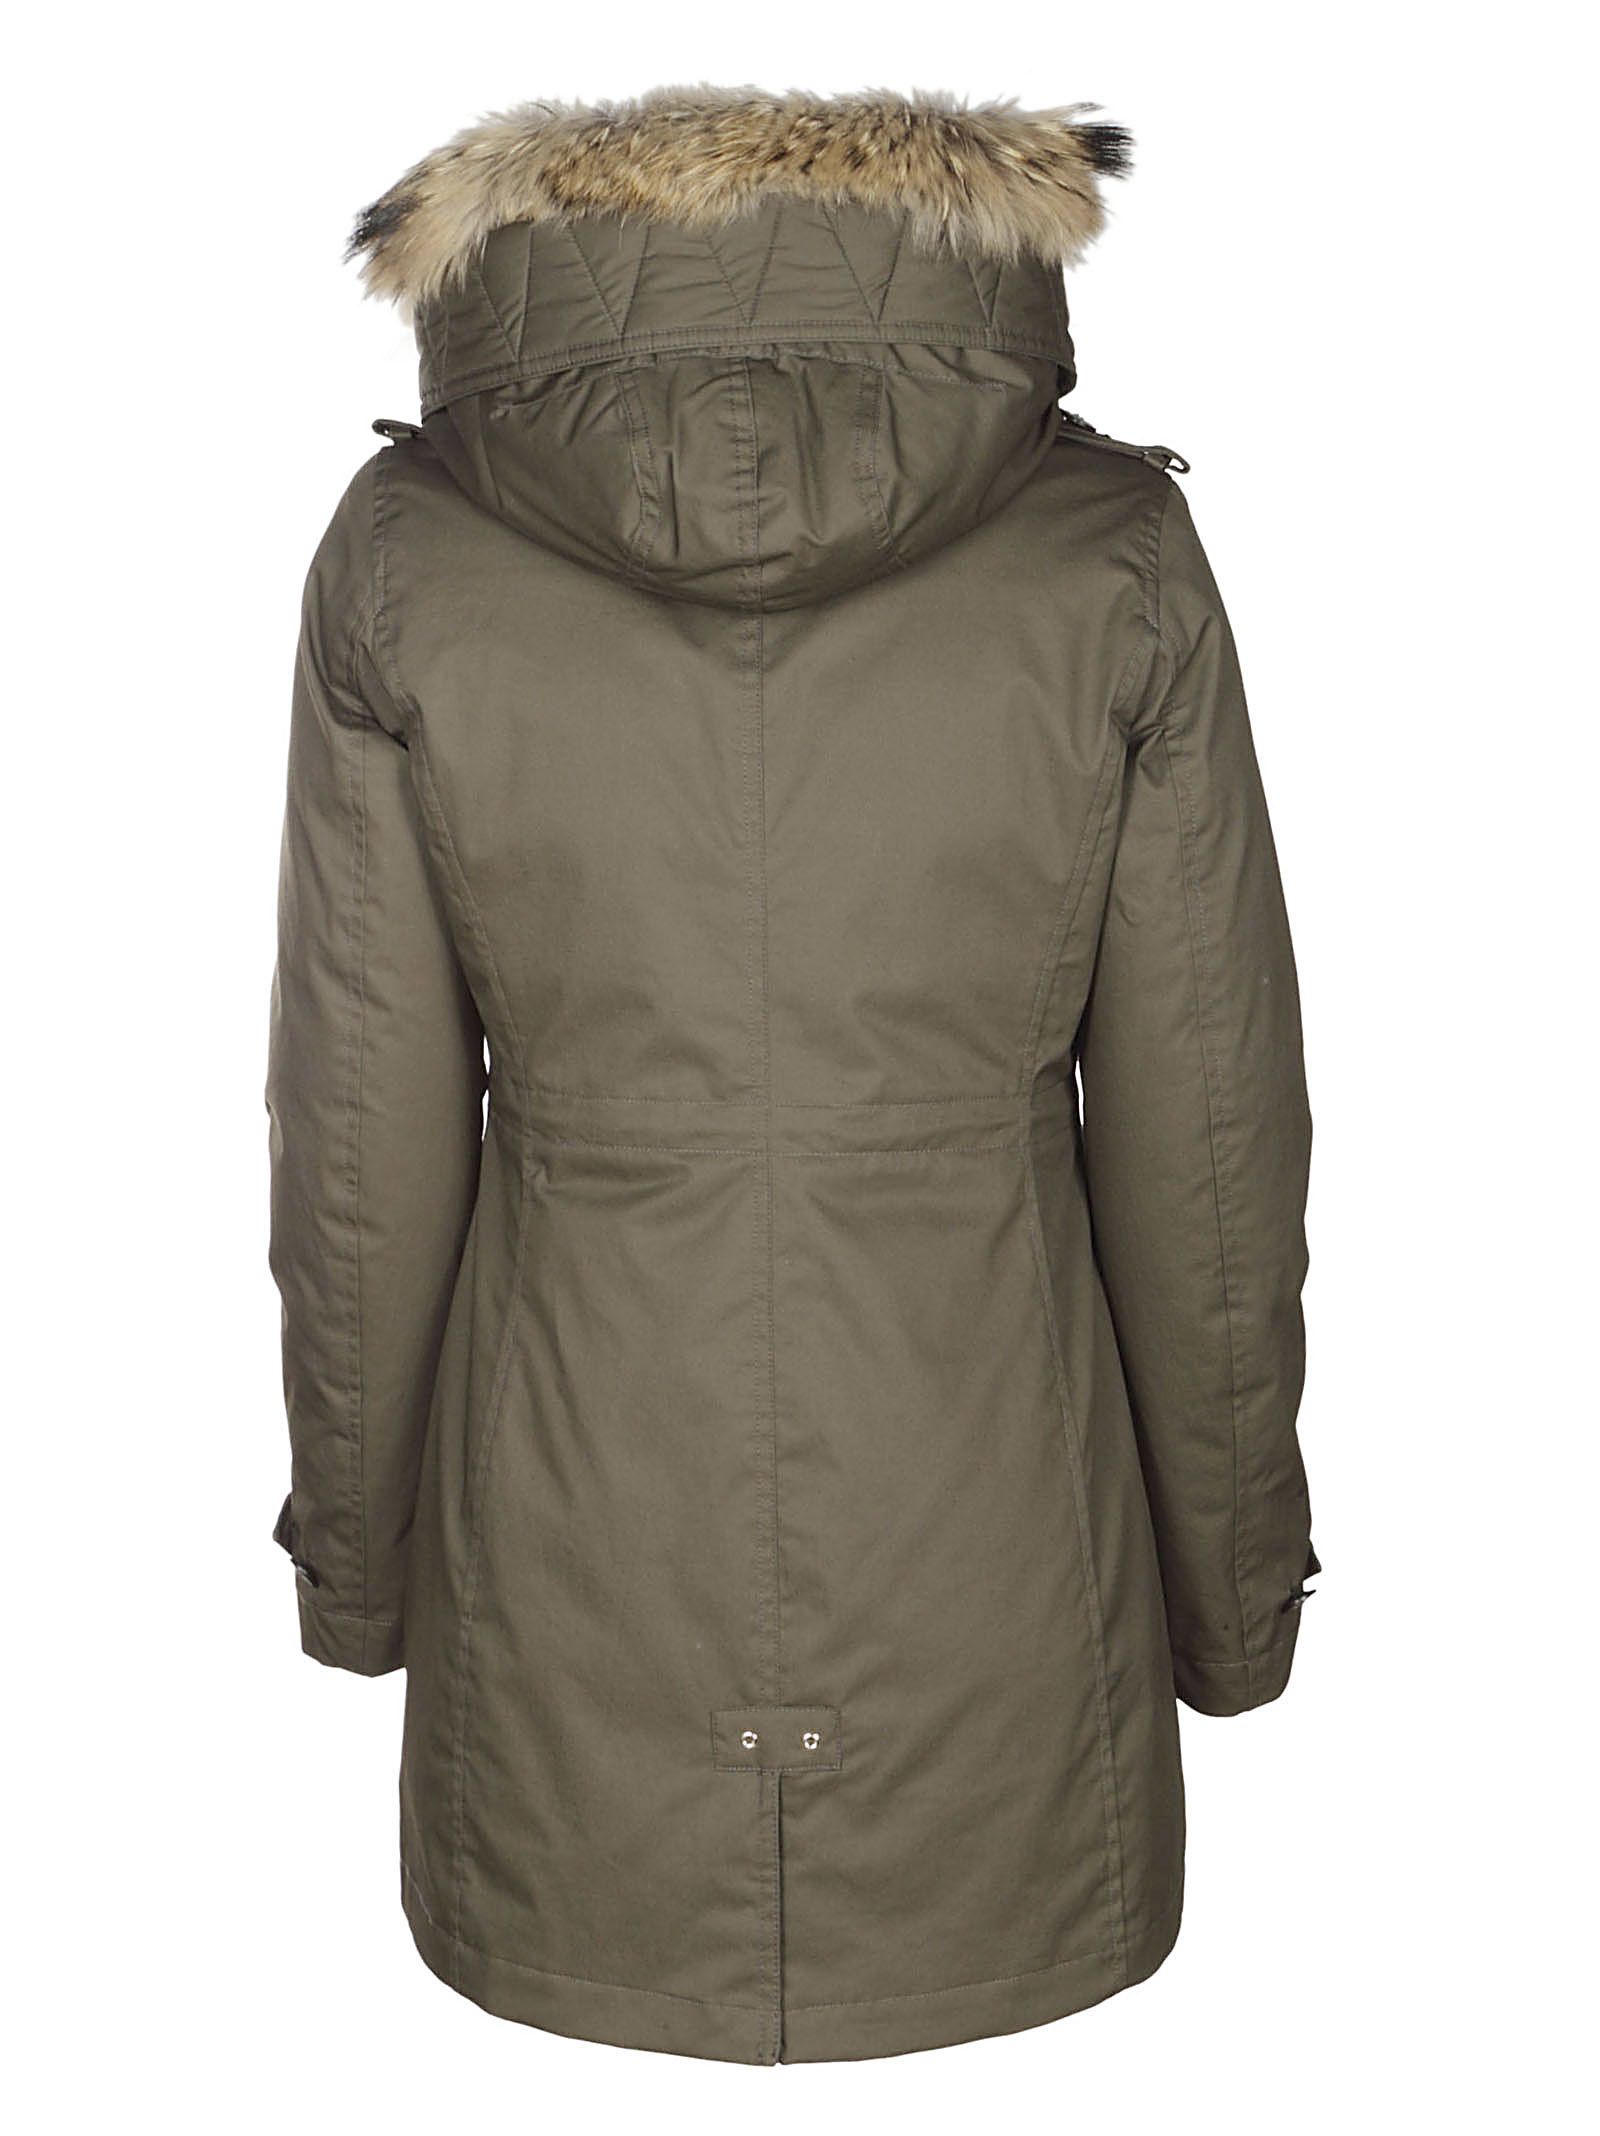 italist | Best price in the market for Woolrich Woolrich Hooded Parka ...